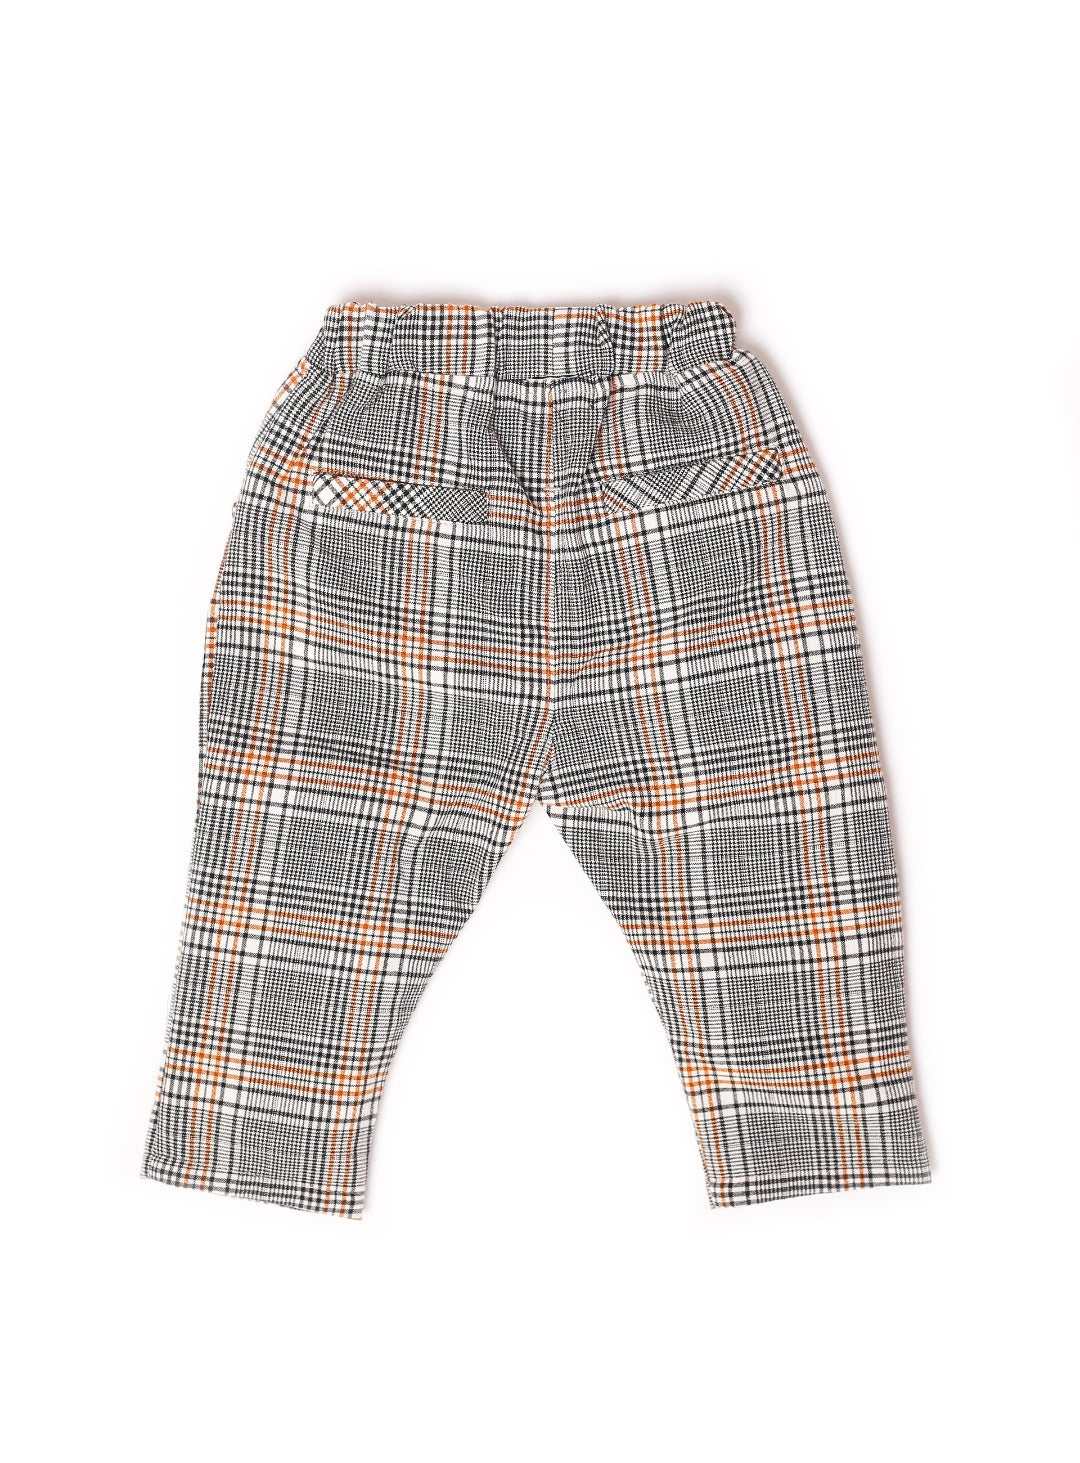 funky chocolate brown checked pants